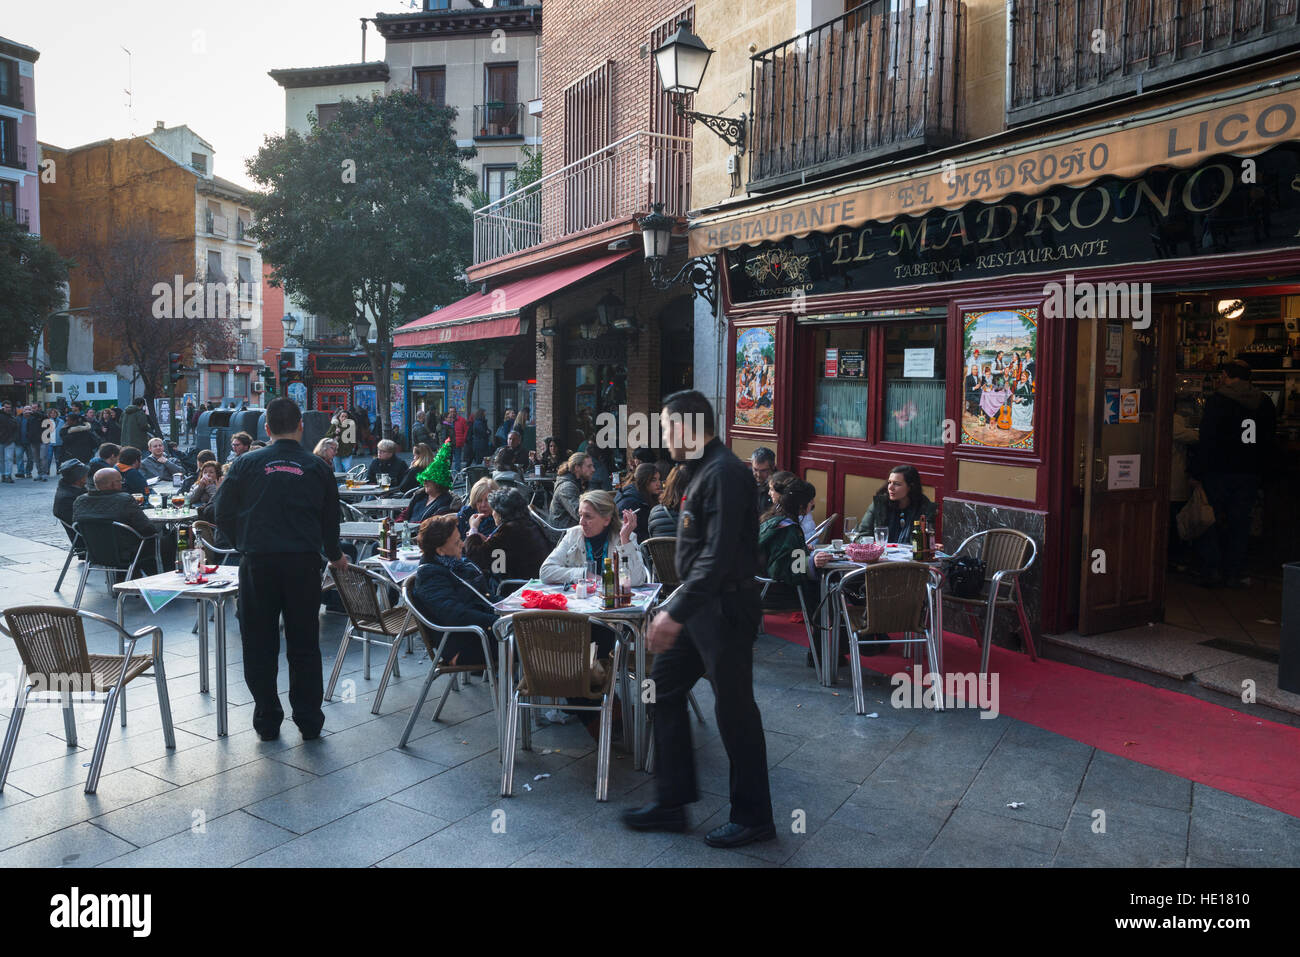 El Madrono Restaurant in Central Madrid, Spain, with outdoor seating. Stock Photo